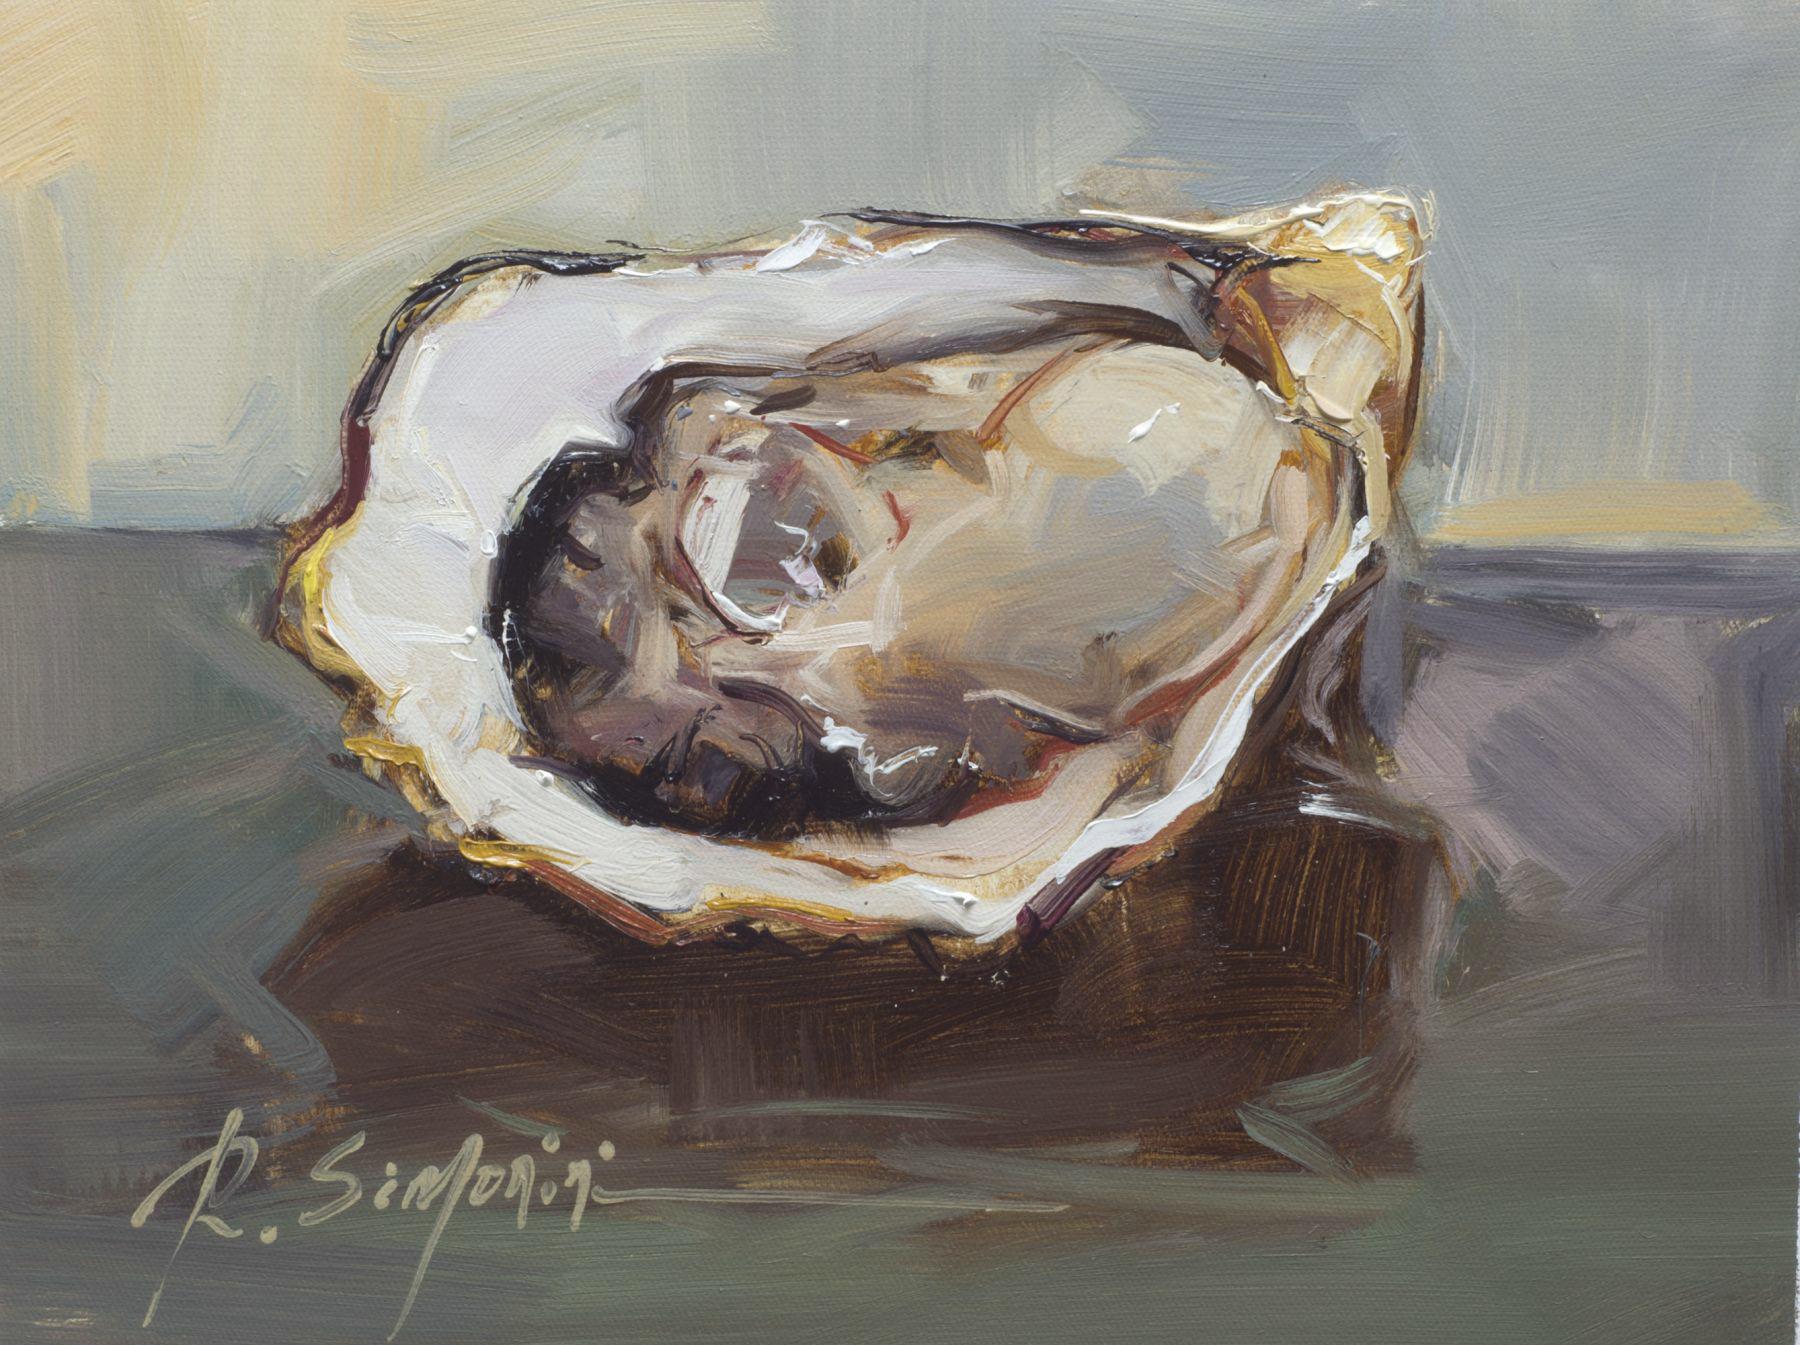 This painting by artist Ray Simonini titled "Plucked from the Ocean" is a 12x16 nautical oil painting on canvas featuring a close-up of an oyster shell against a deep green and gray background.

About the artist:
Simonini was born in China in 1981.